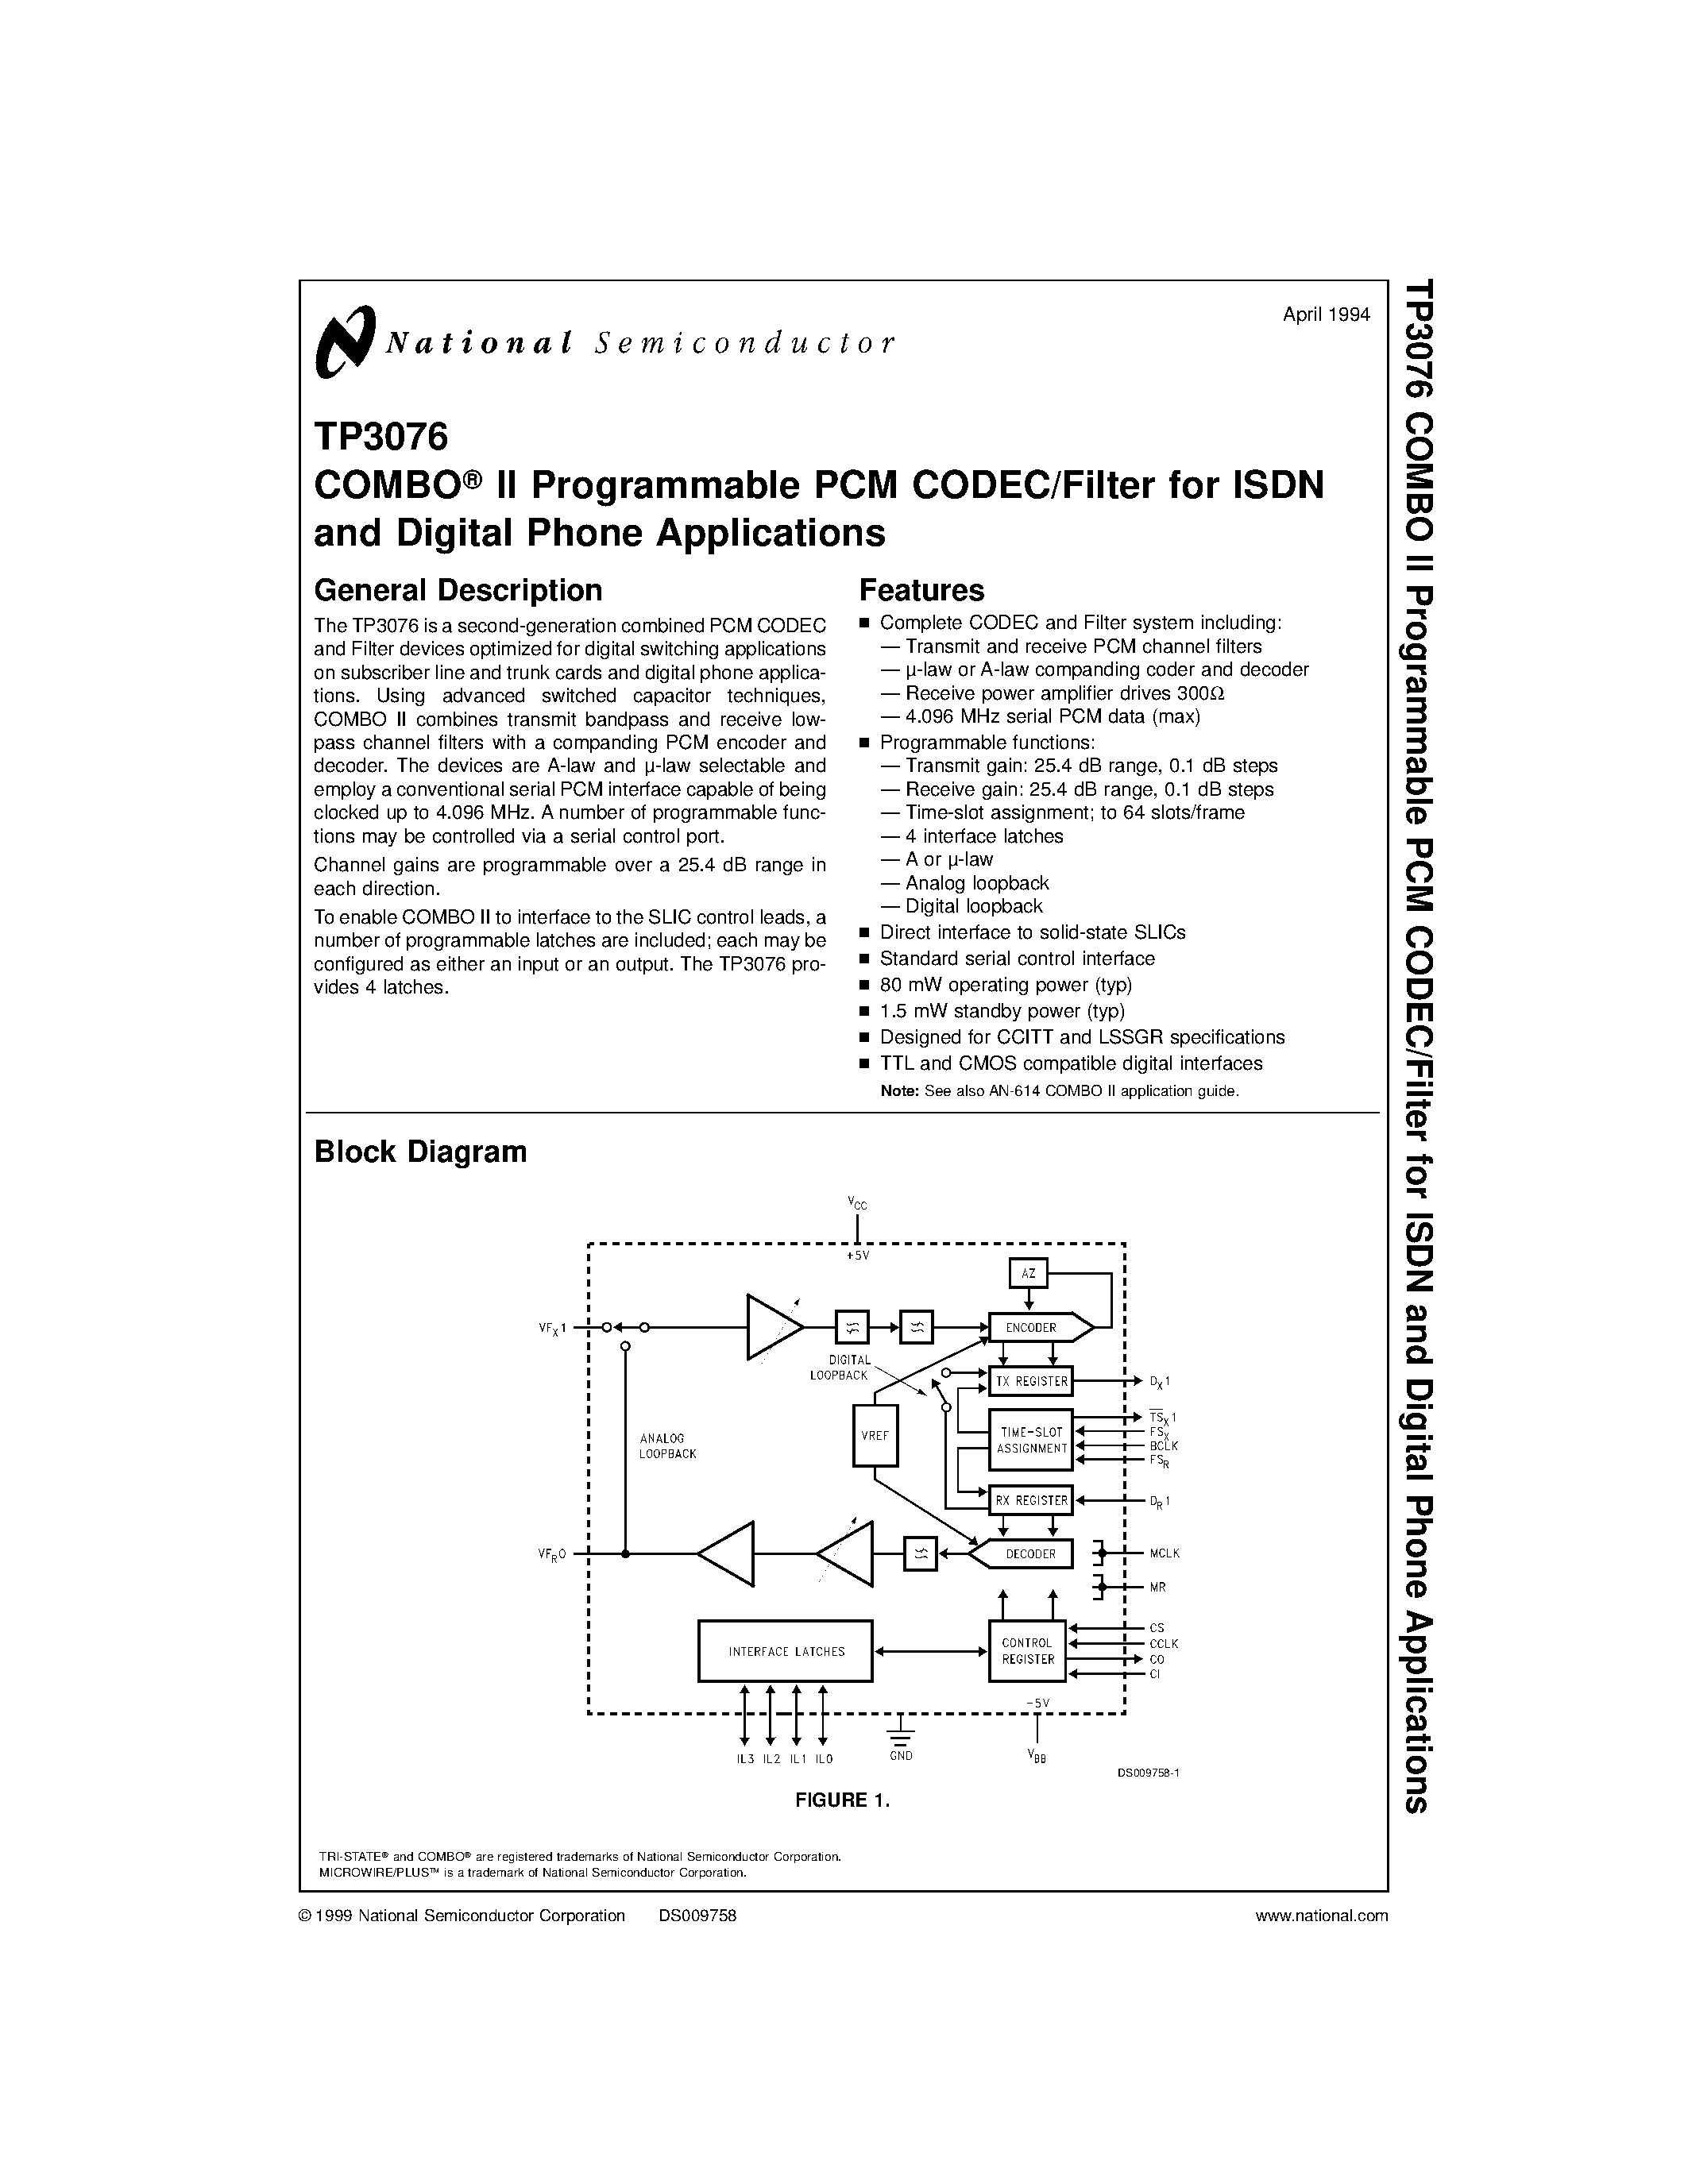 Даташит TP3076 - COMBO II Programmable PCM CODEC/Filter for ISDN and Digital Phone Applications страница 1